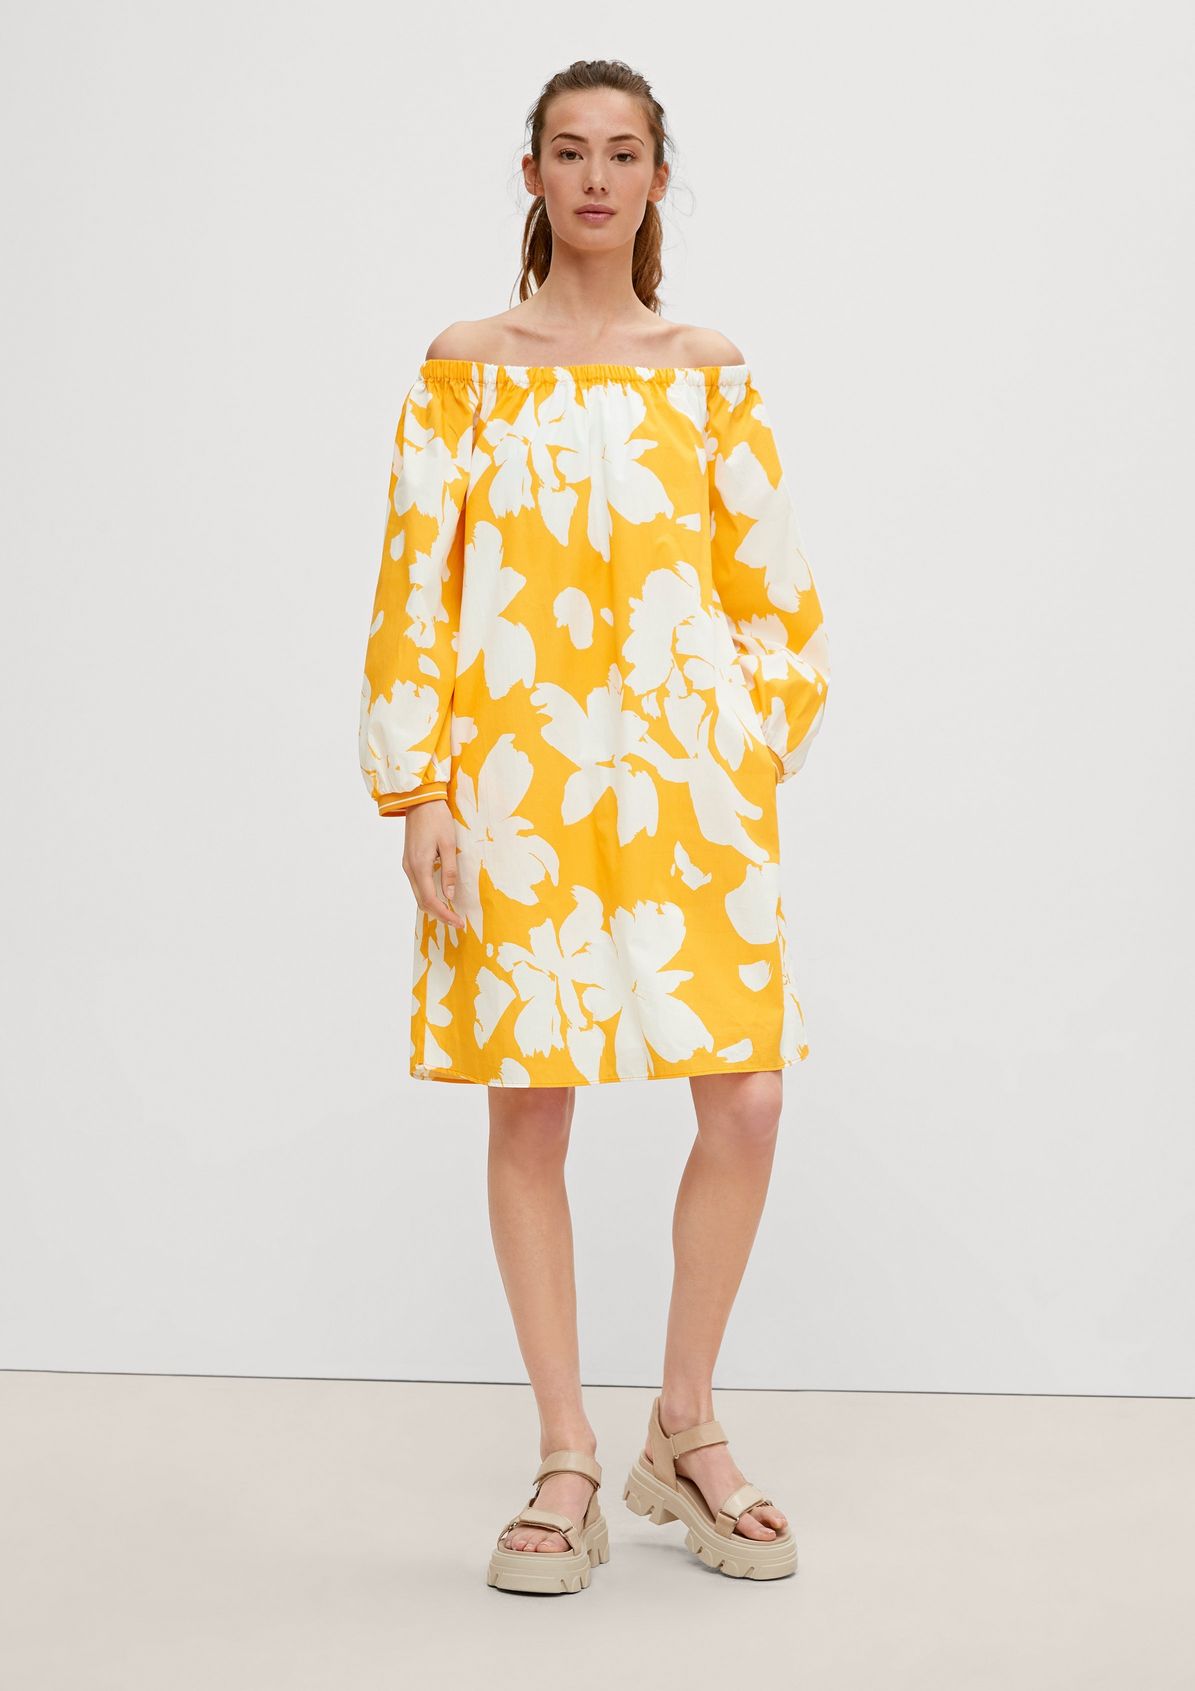 Dress with 3/4-length sleeves from comma